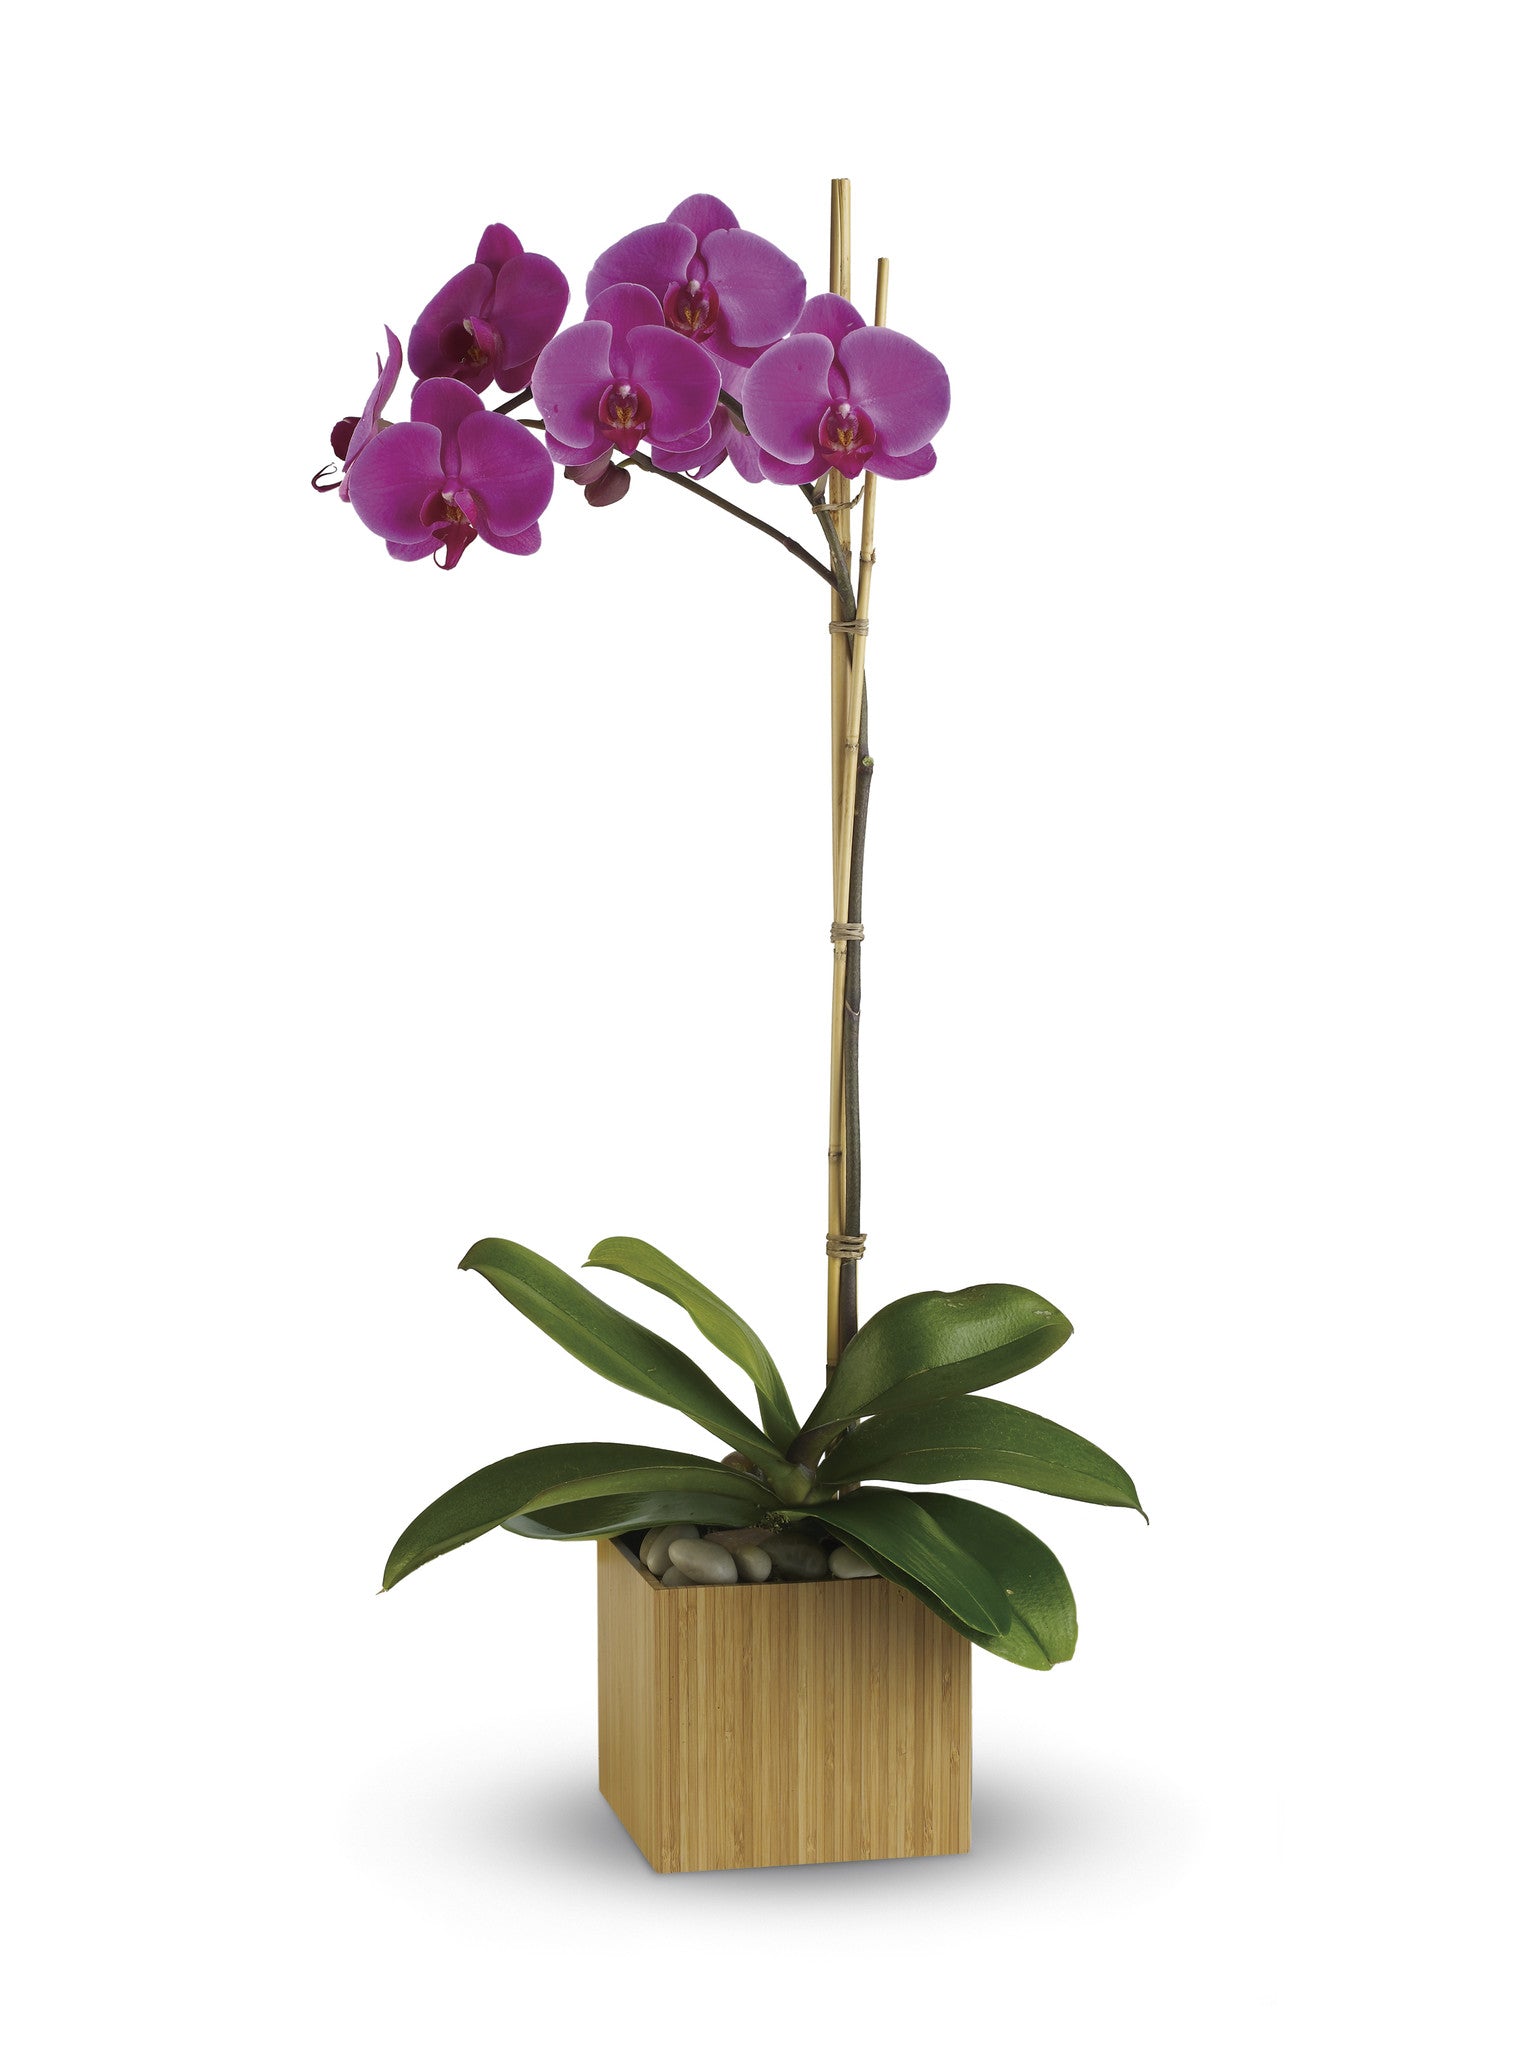 Imperial Orchid - Saucha Floral Design